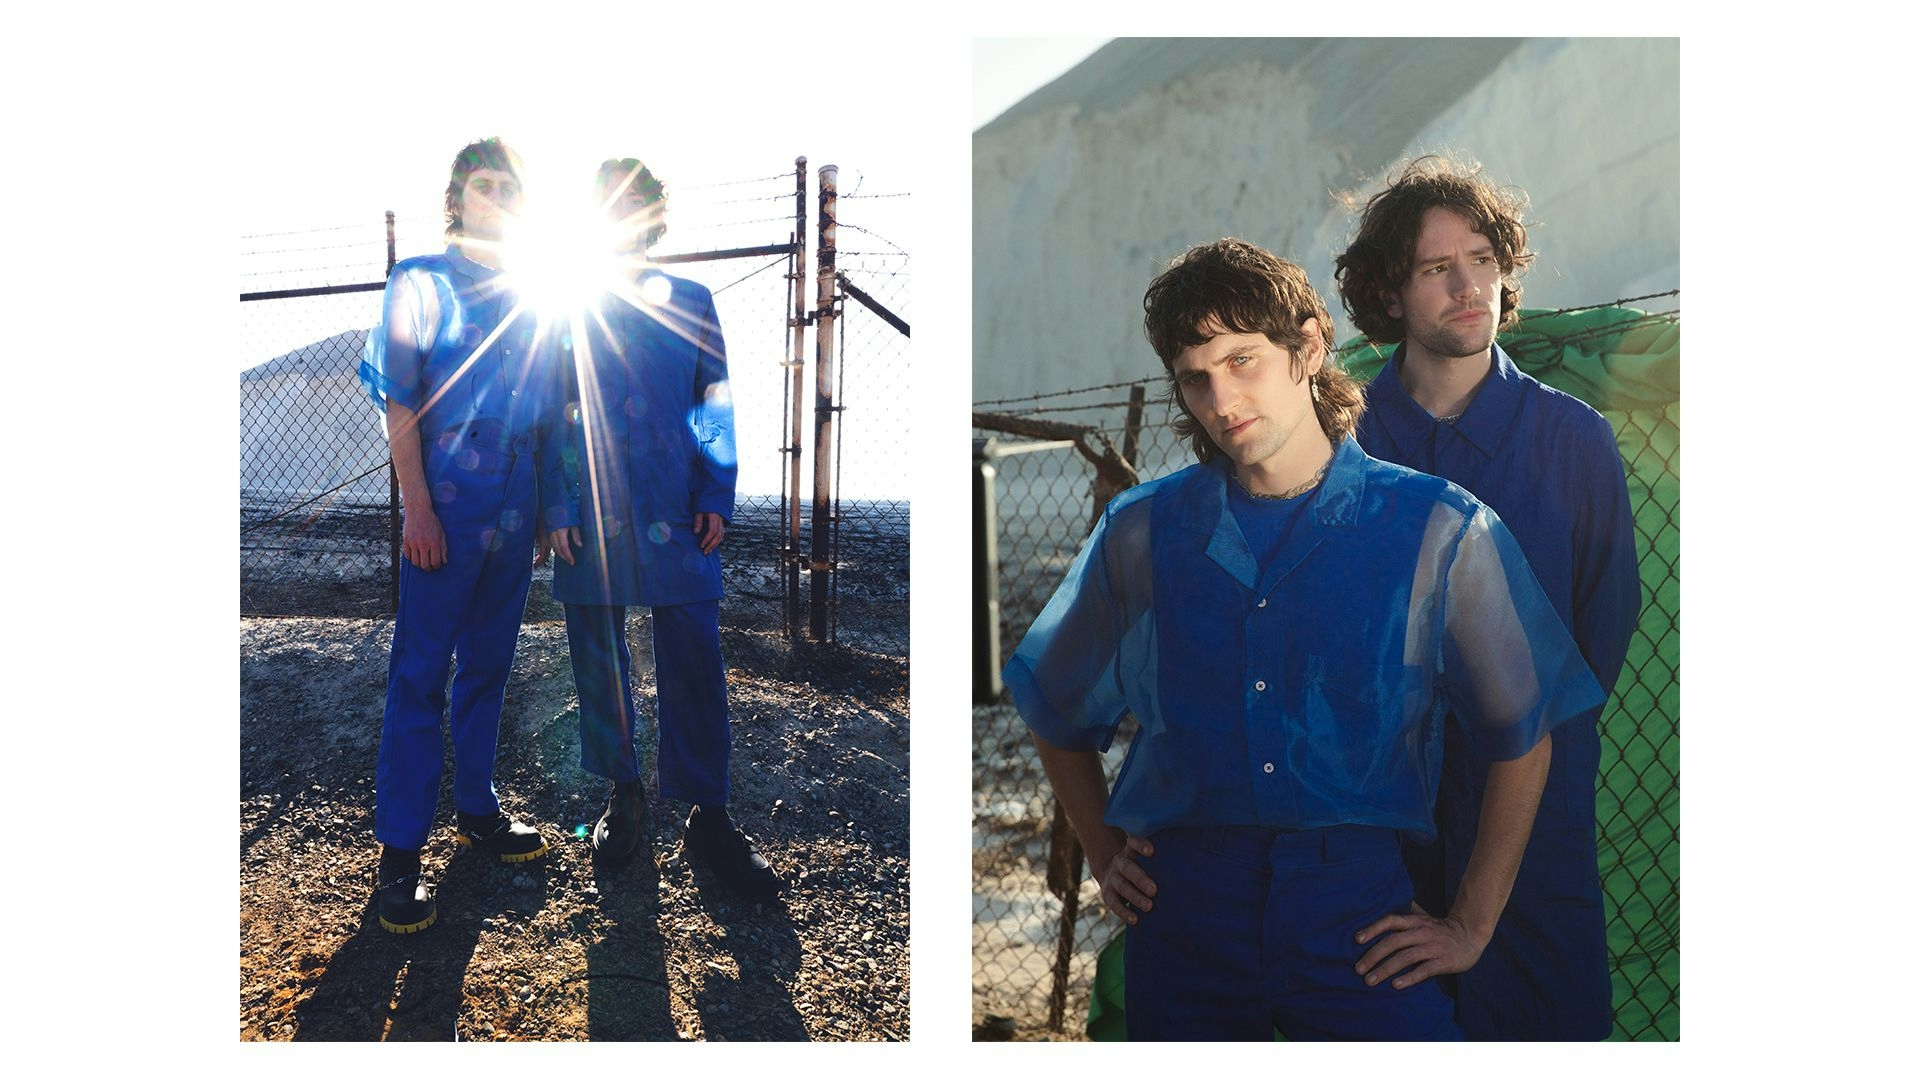 From the Sports Get A Good Look Album Campaign is a diptych of the band members wearing blue